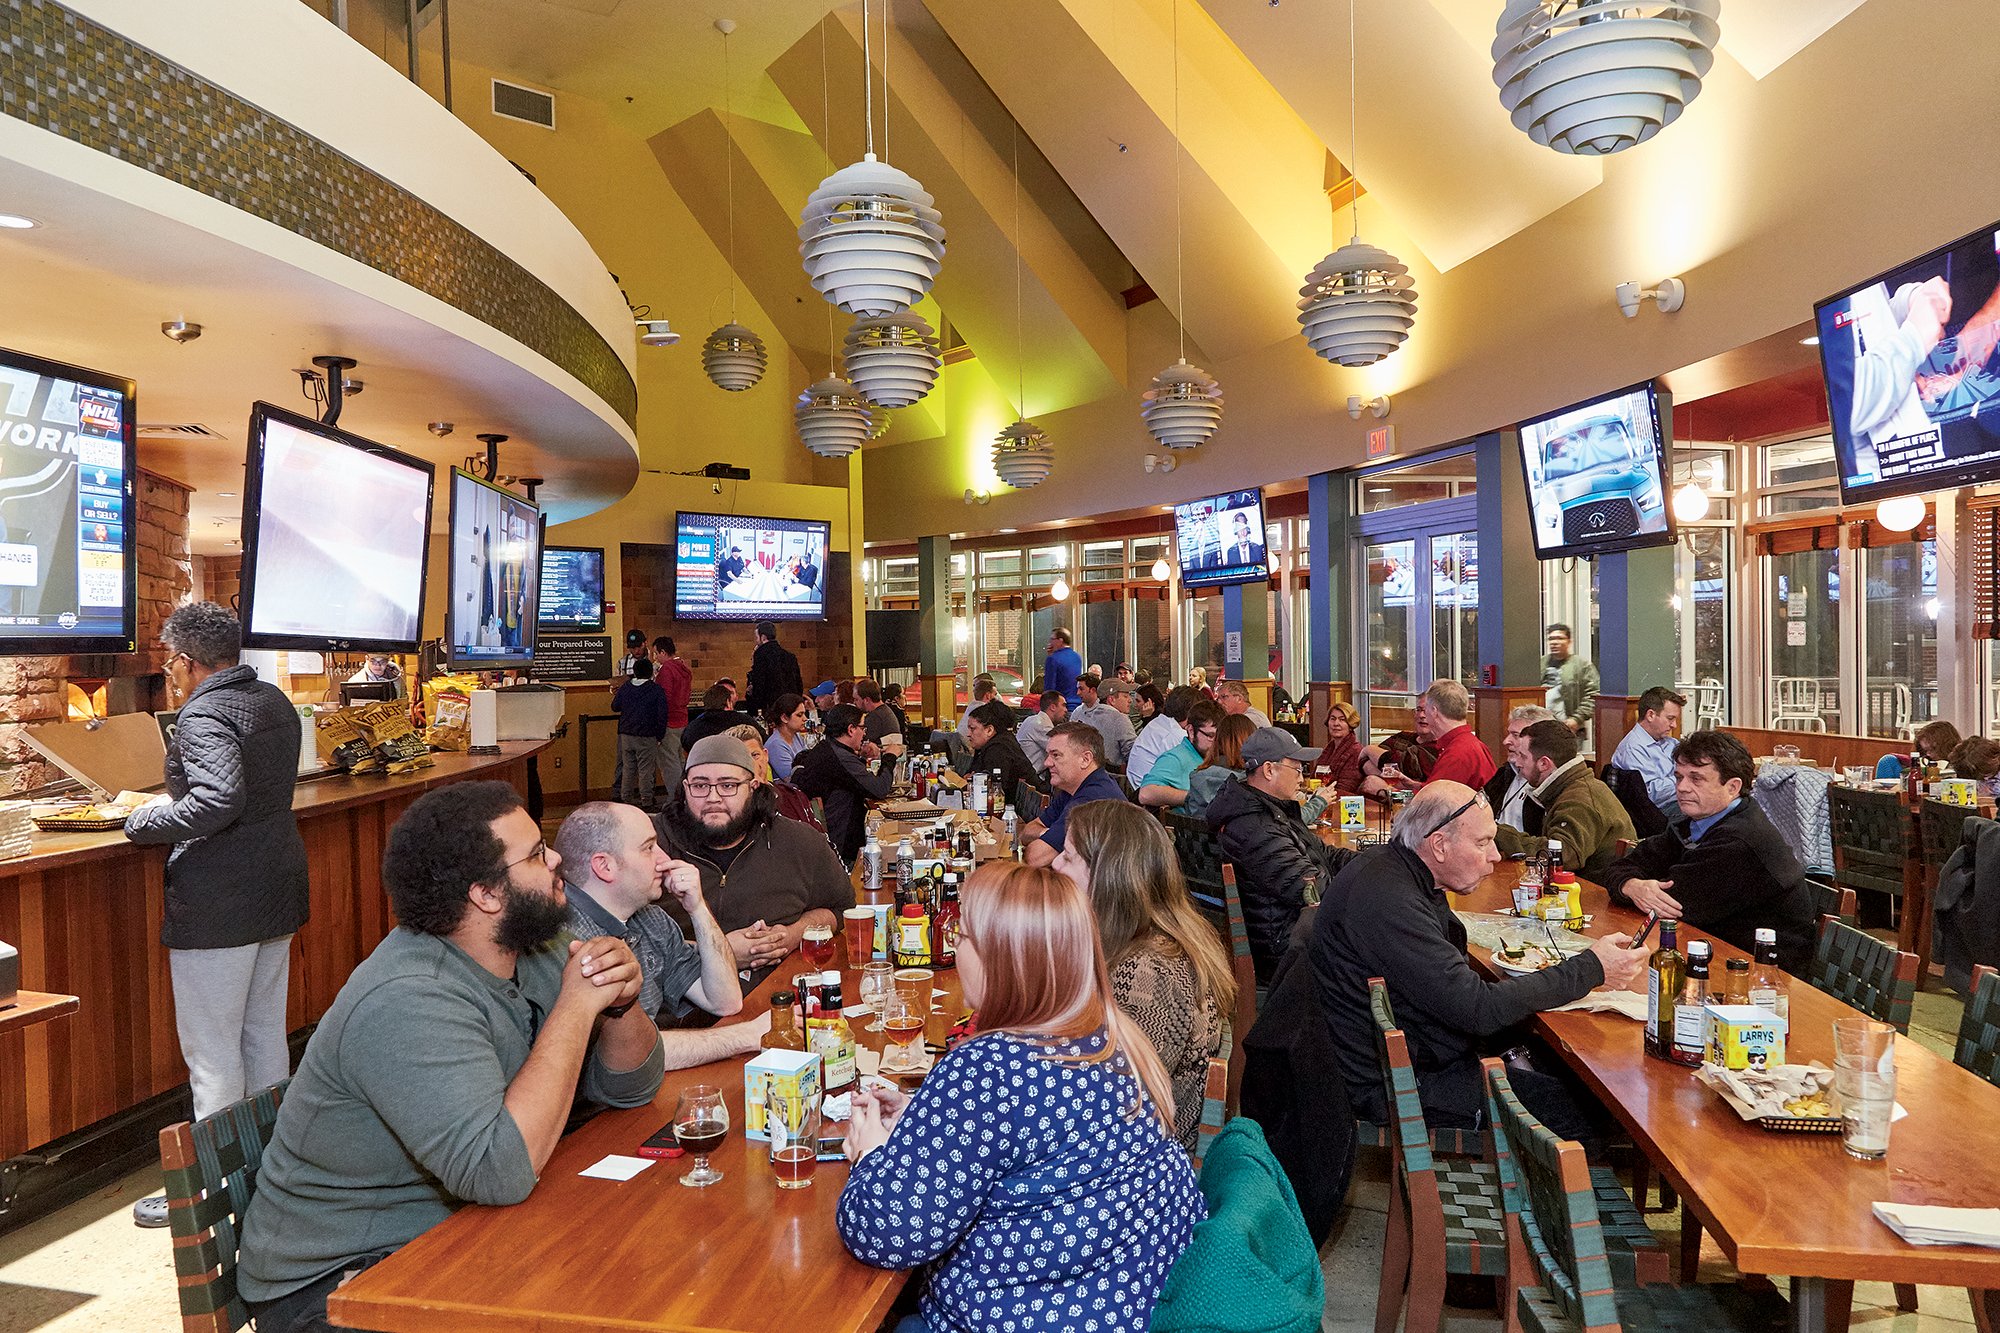 The sports bar offers 12 TVs. Photograph by Jeff Elkins.